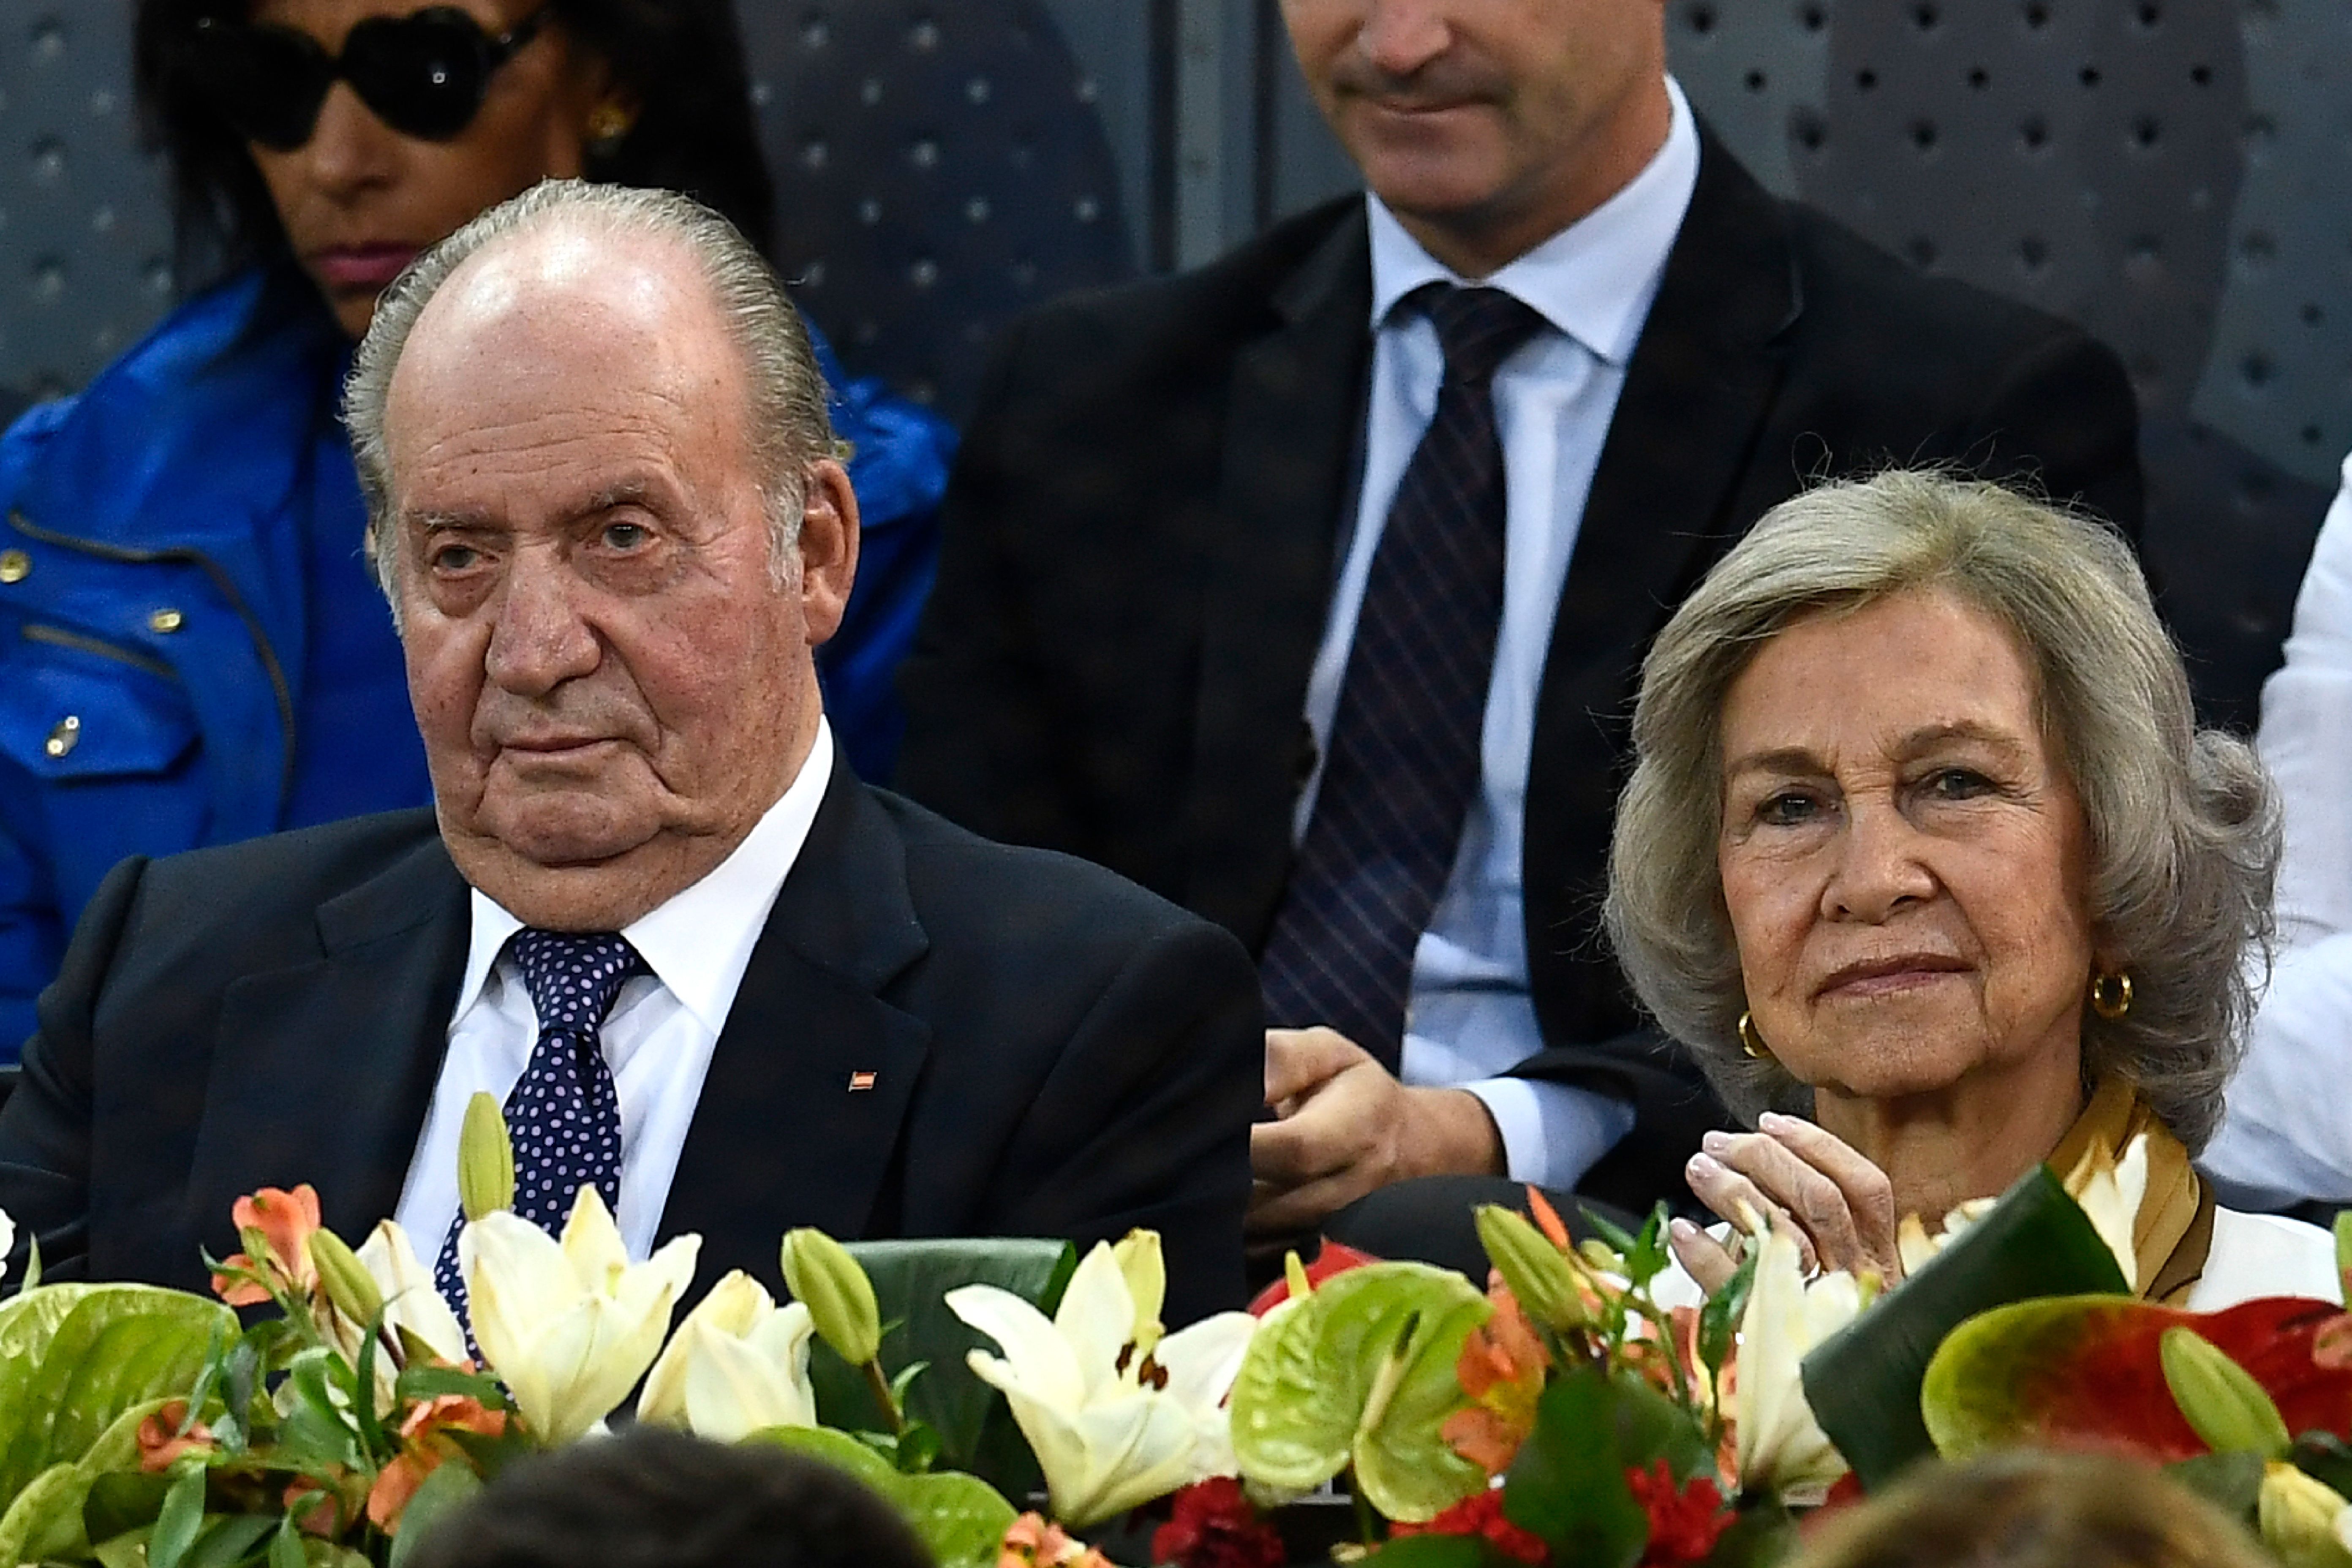 Former King Juan Carlos and Queen Sofia during an ATP Madrid Open semi-final tennis match on May 11, 2019 at the Caja Magica in Madrid. / Source: Getty Images